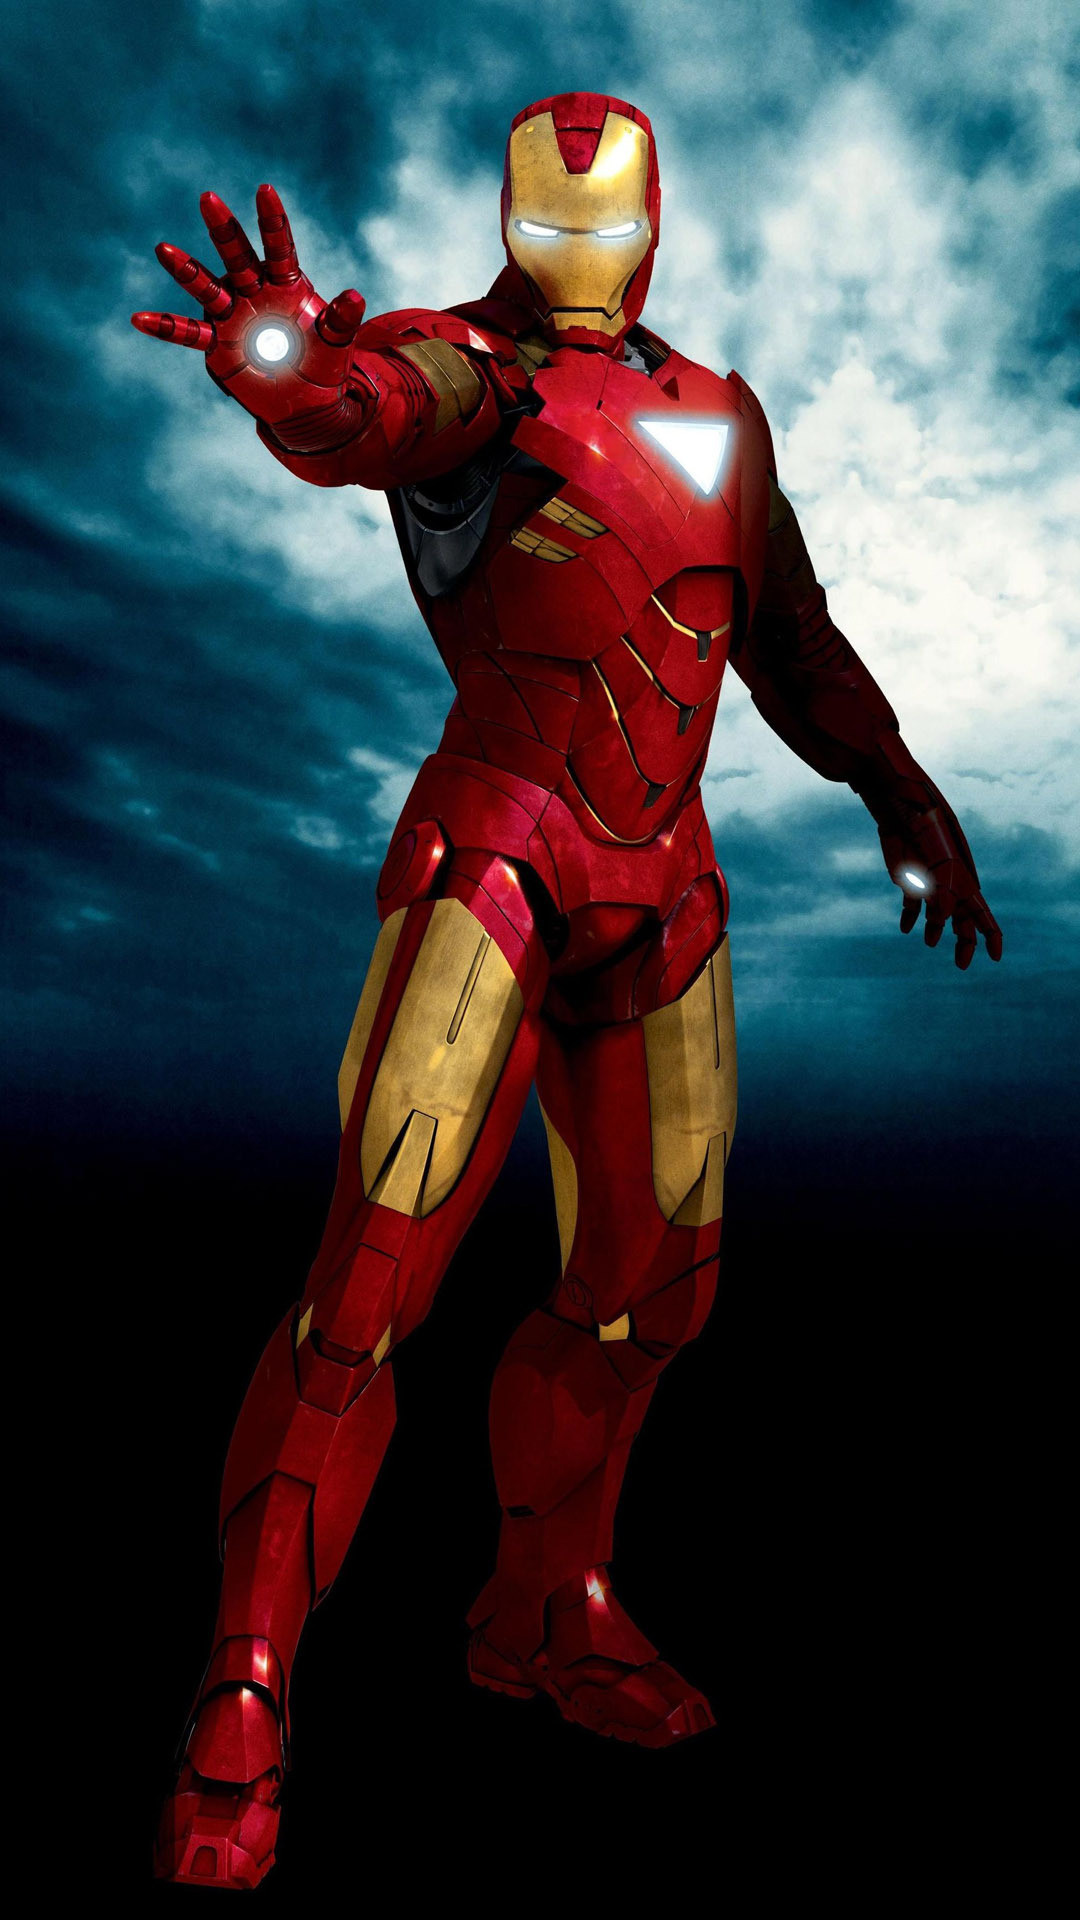 1080x1920 Tony stark wallpaper iron man movies wallpapers for free download